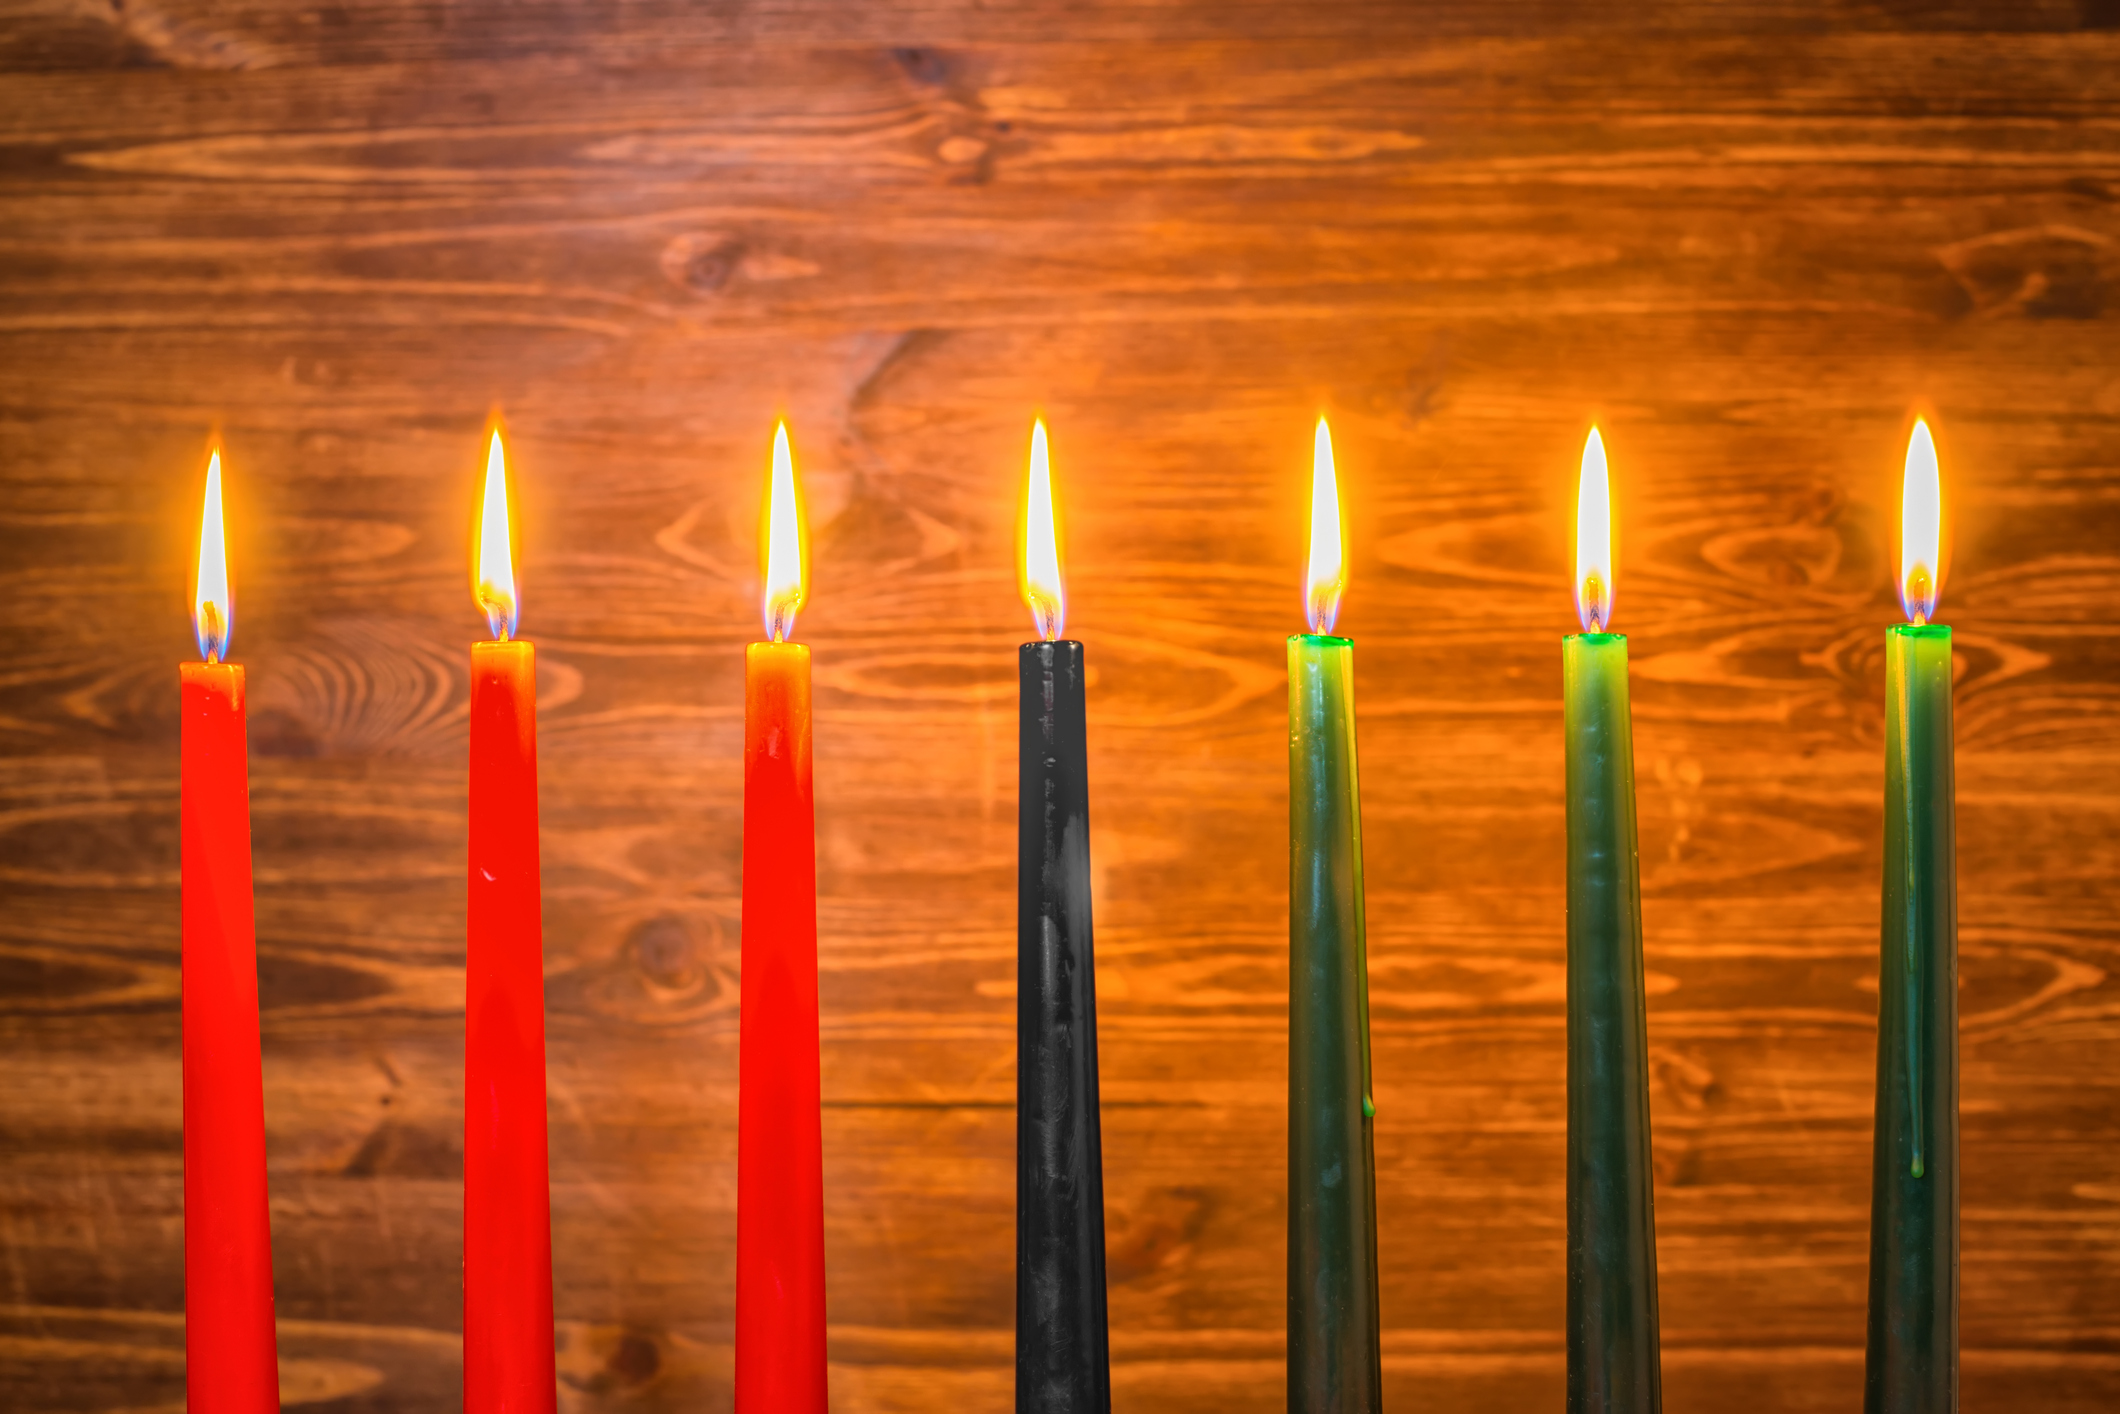 honor-african-american-culture-at-the-28th-annual-kwanzaa-celebration-dec-30